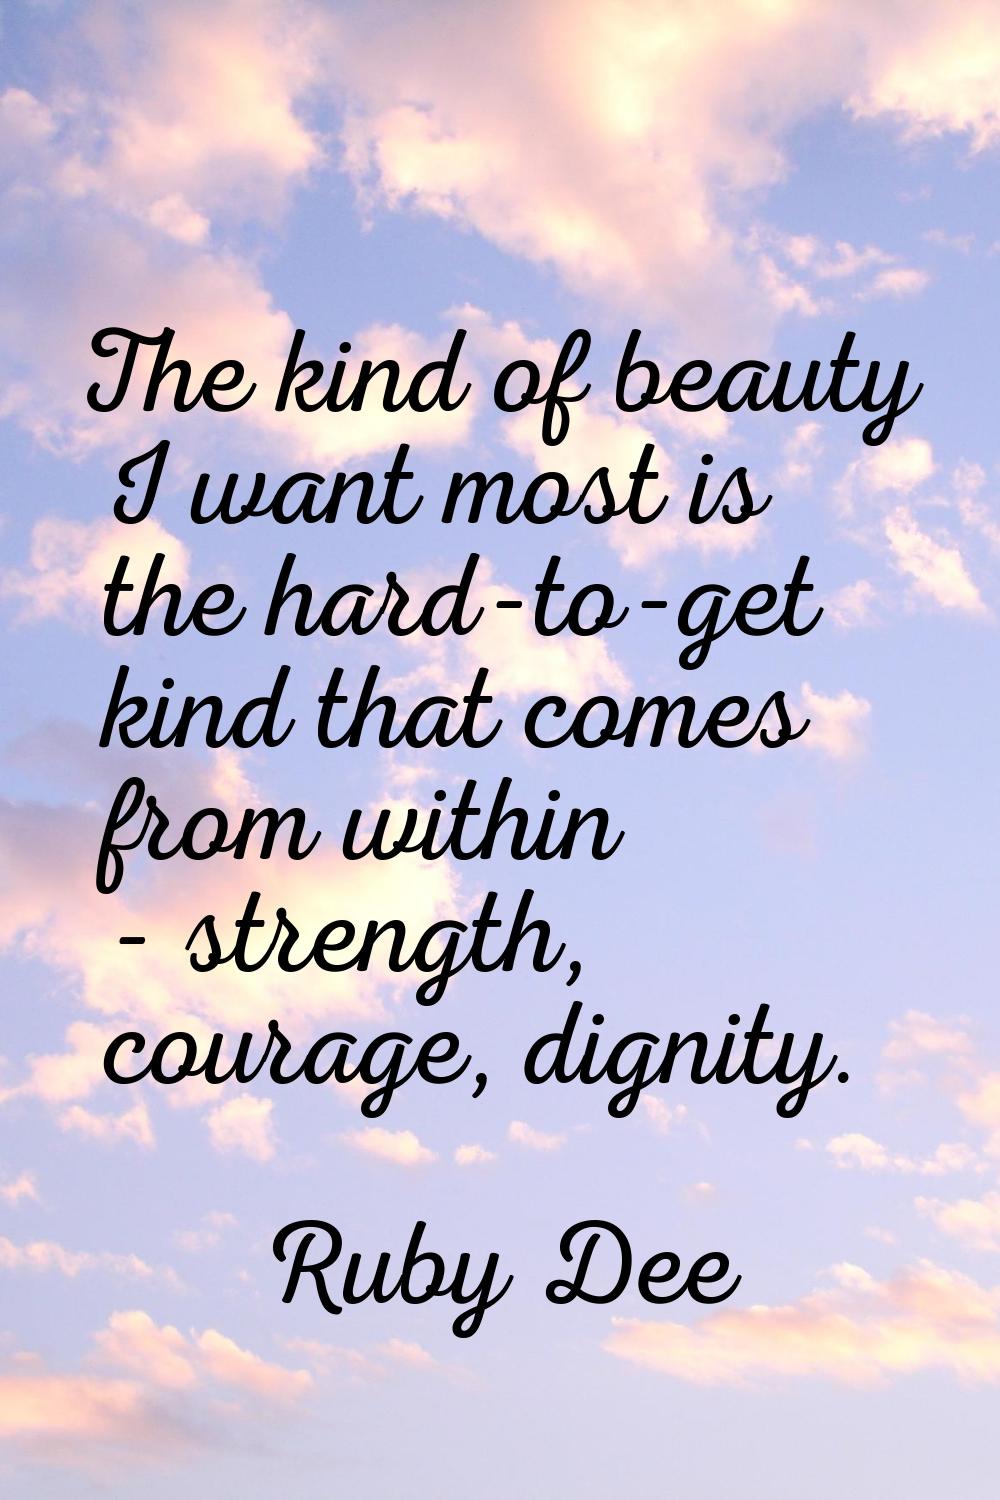 The kind of beauty I want most is the hard-to-get kind that comes from within - strength, courage, 